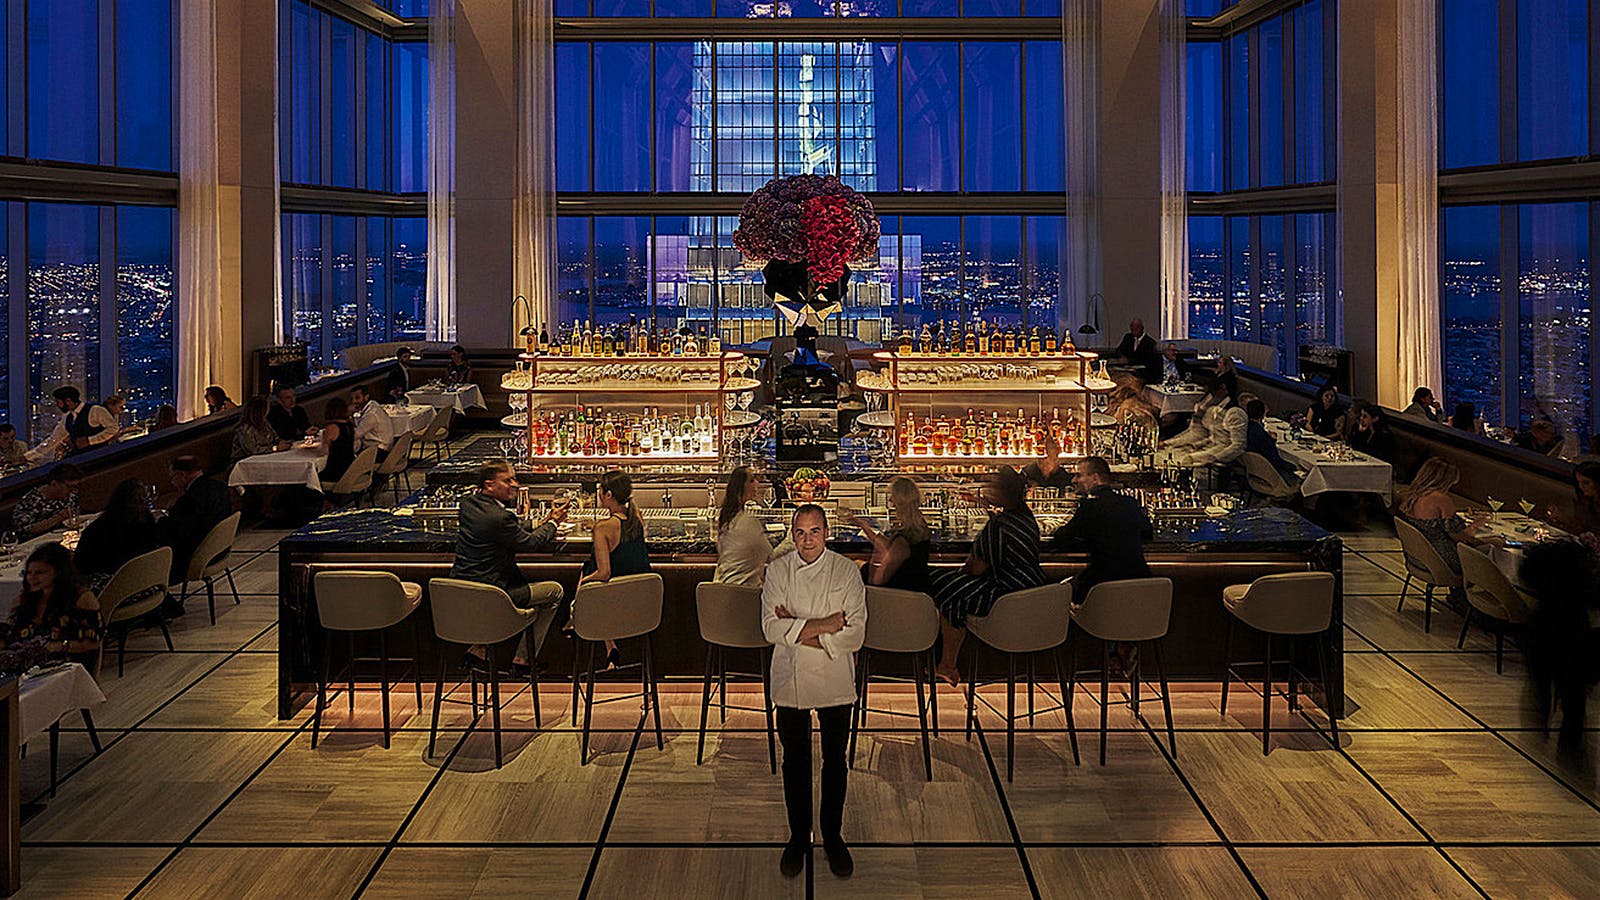 Jean-Georges Continues to Expand His Global Restaurant Empire